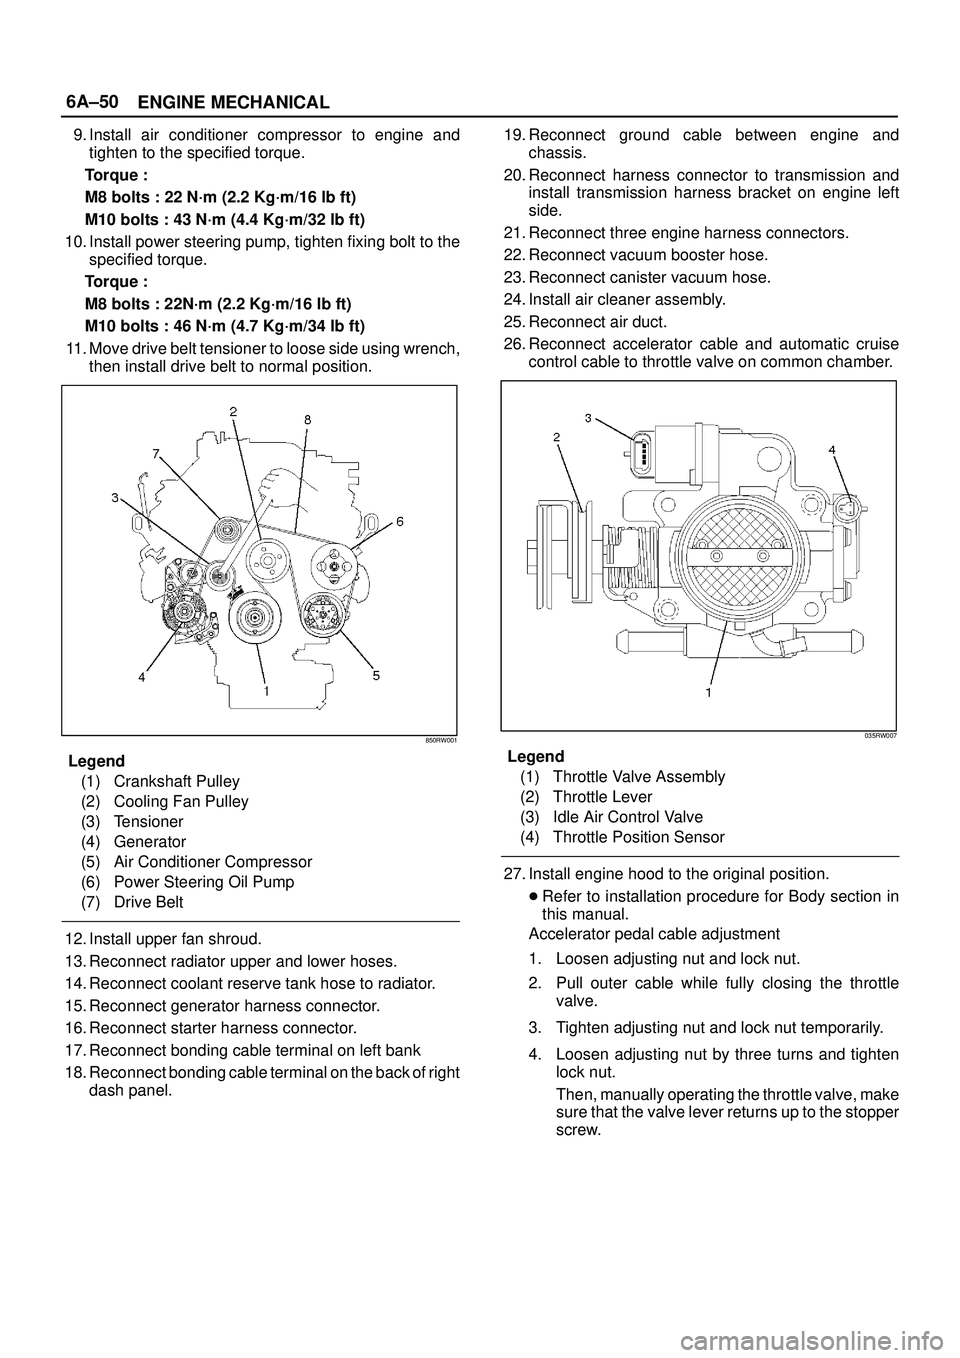 ISUZU TROOPER 1998  Service Repair Manual 6A±50
ENGINE MECHANICAL
9. Install air conditioner compressor to engine and
tighten to the specified torque.
Torque :
M8 bolts : 22 N´m (2.2 Kg´m/16 lb ft)
M10 bolts : 43 N´m (4.4 Kg´m/32 lb ft)
